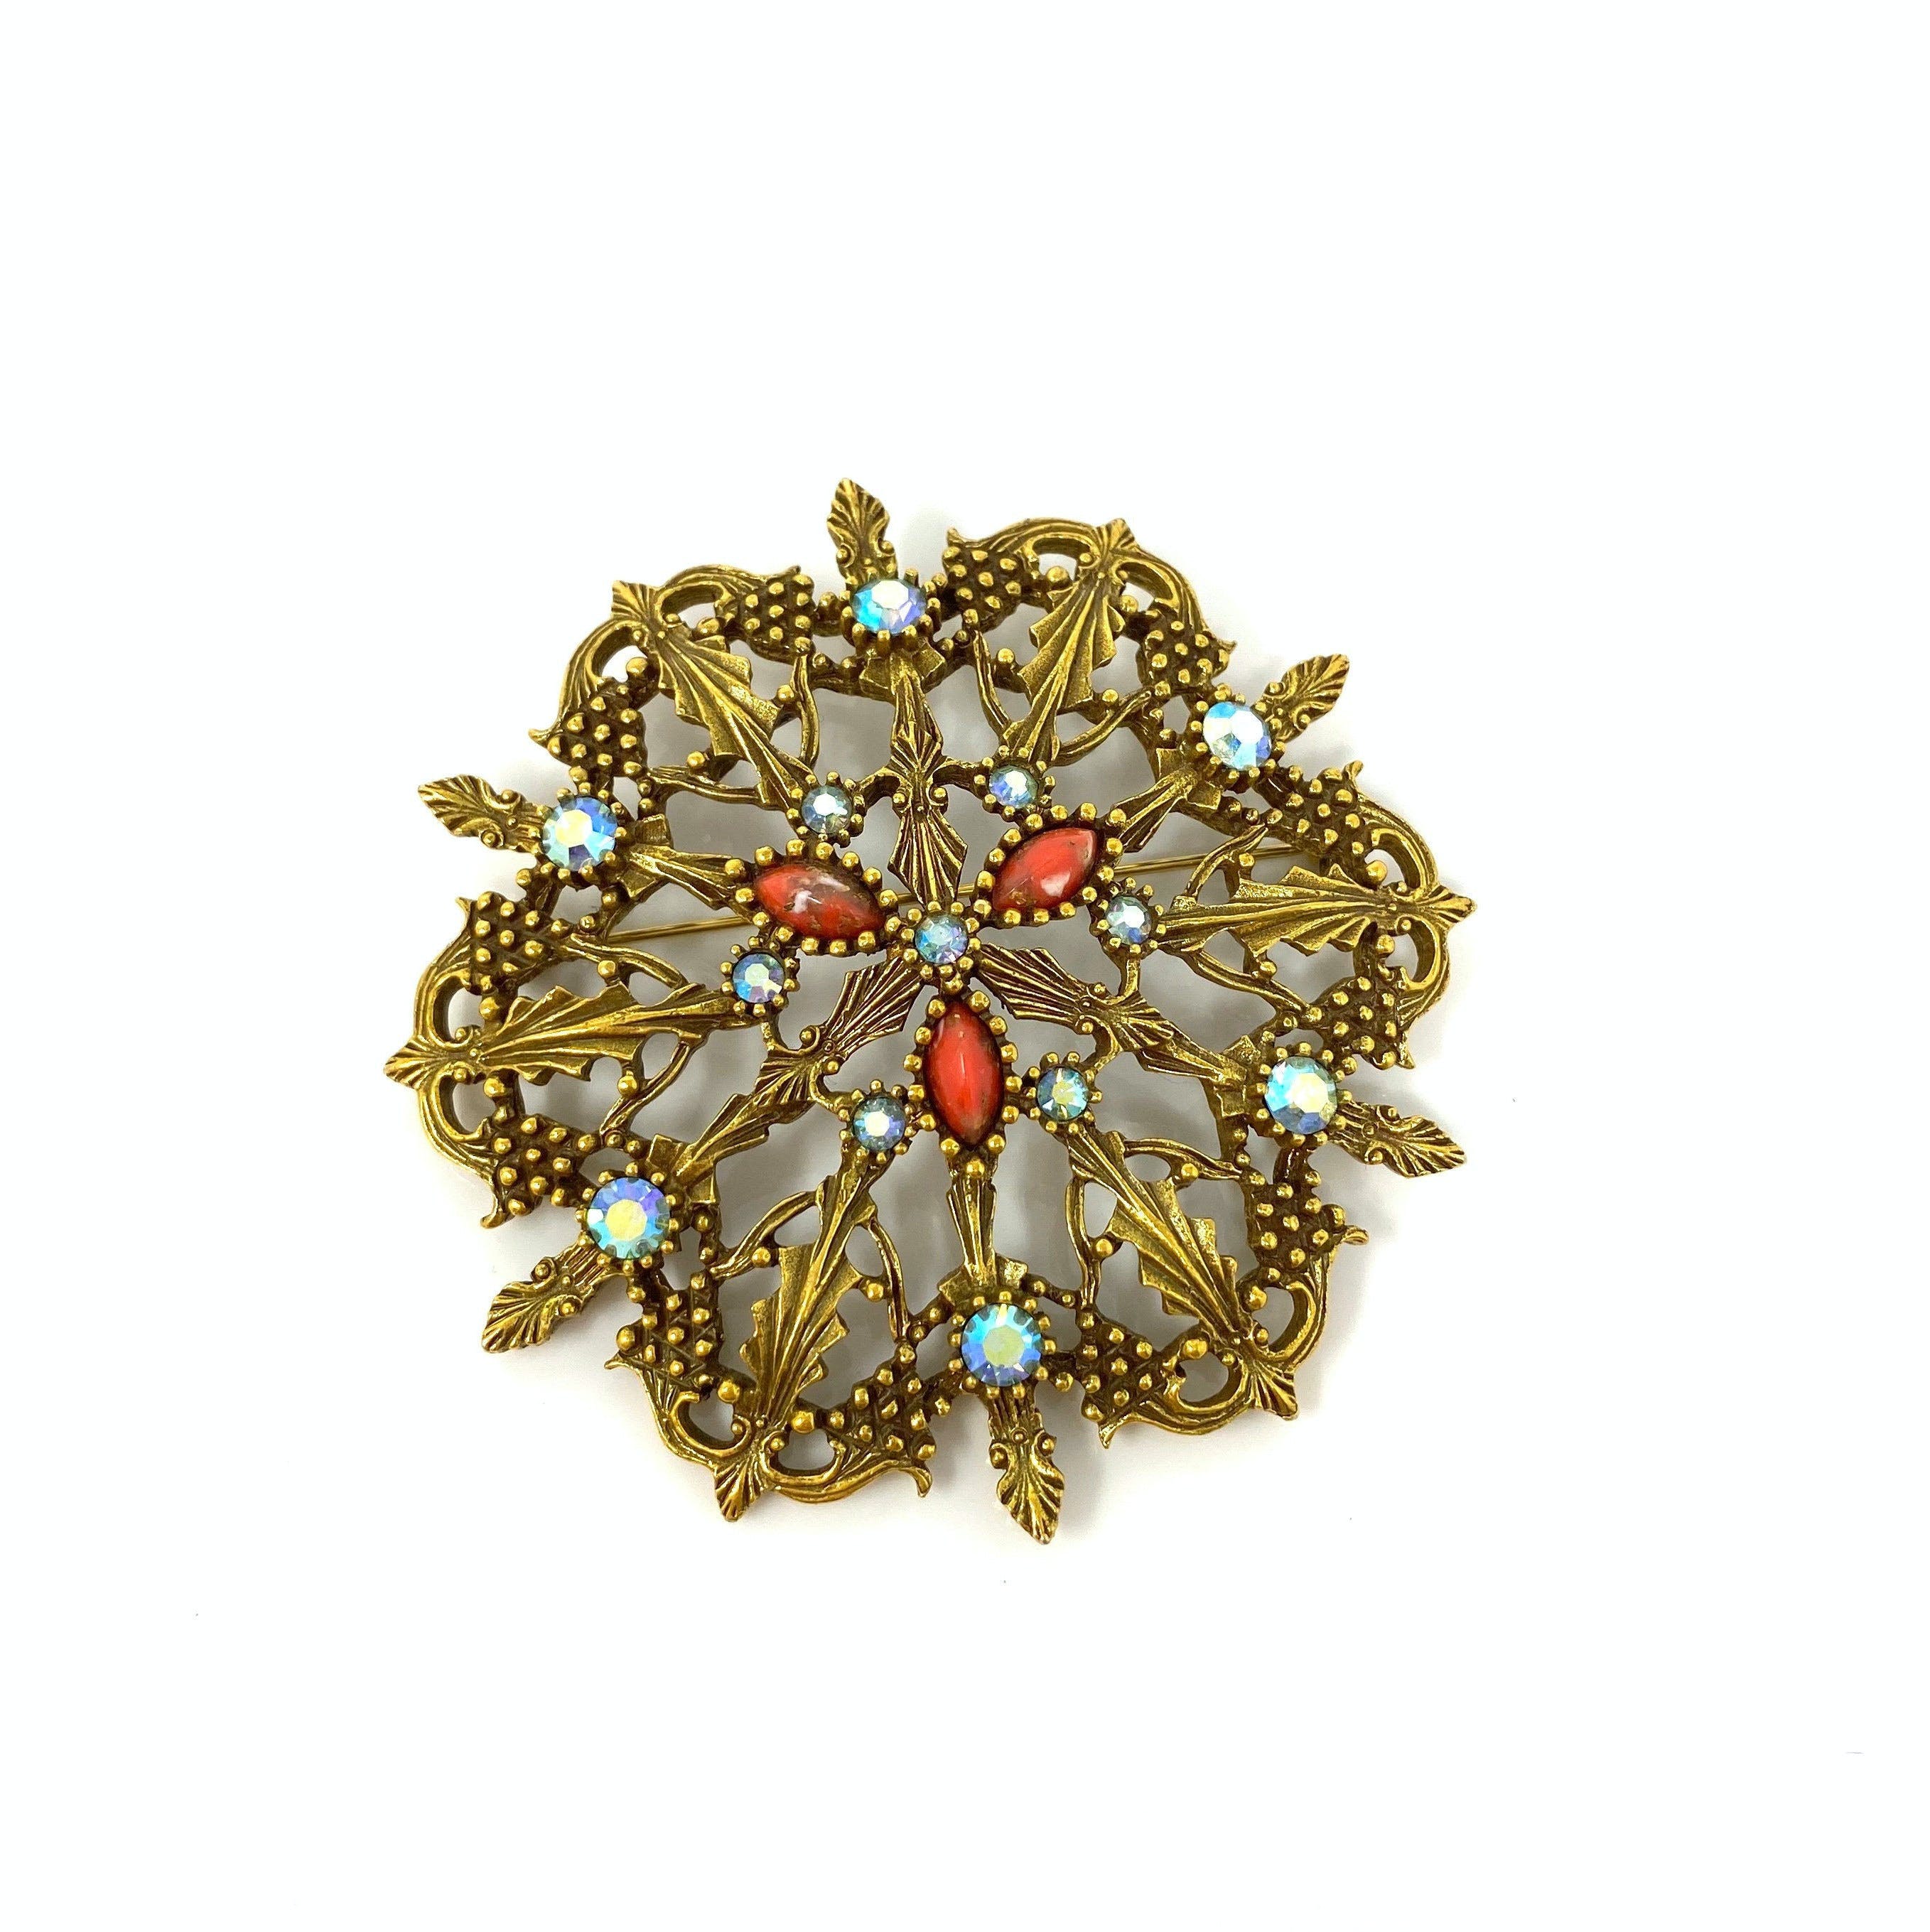 Vintage Gold Tone Victorian Revival Rhinestone Beaded Pin by Emmons ...